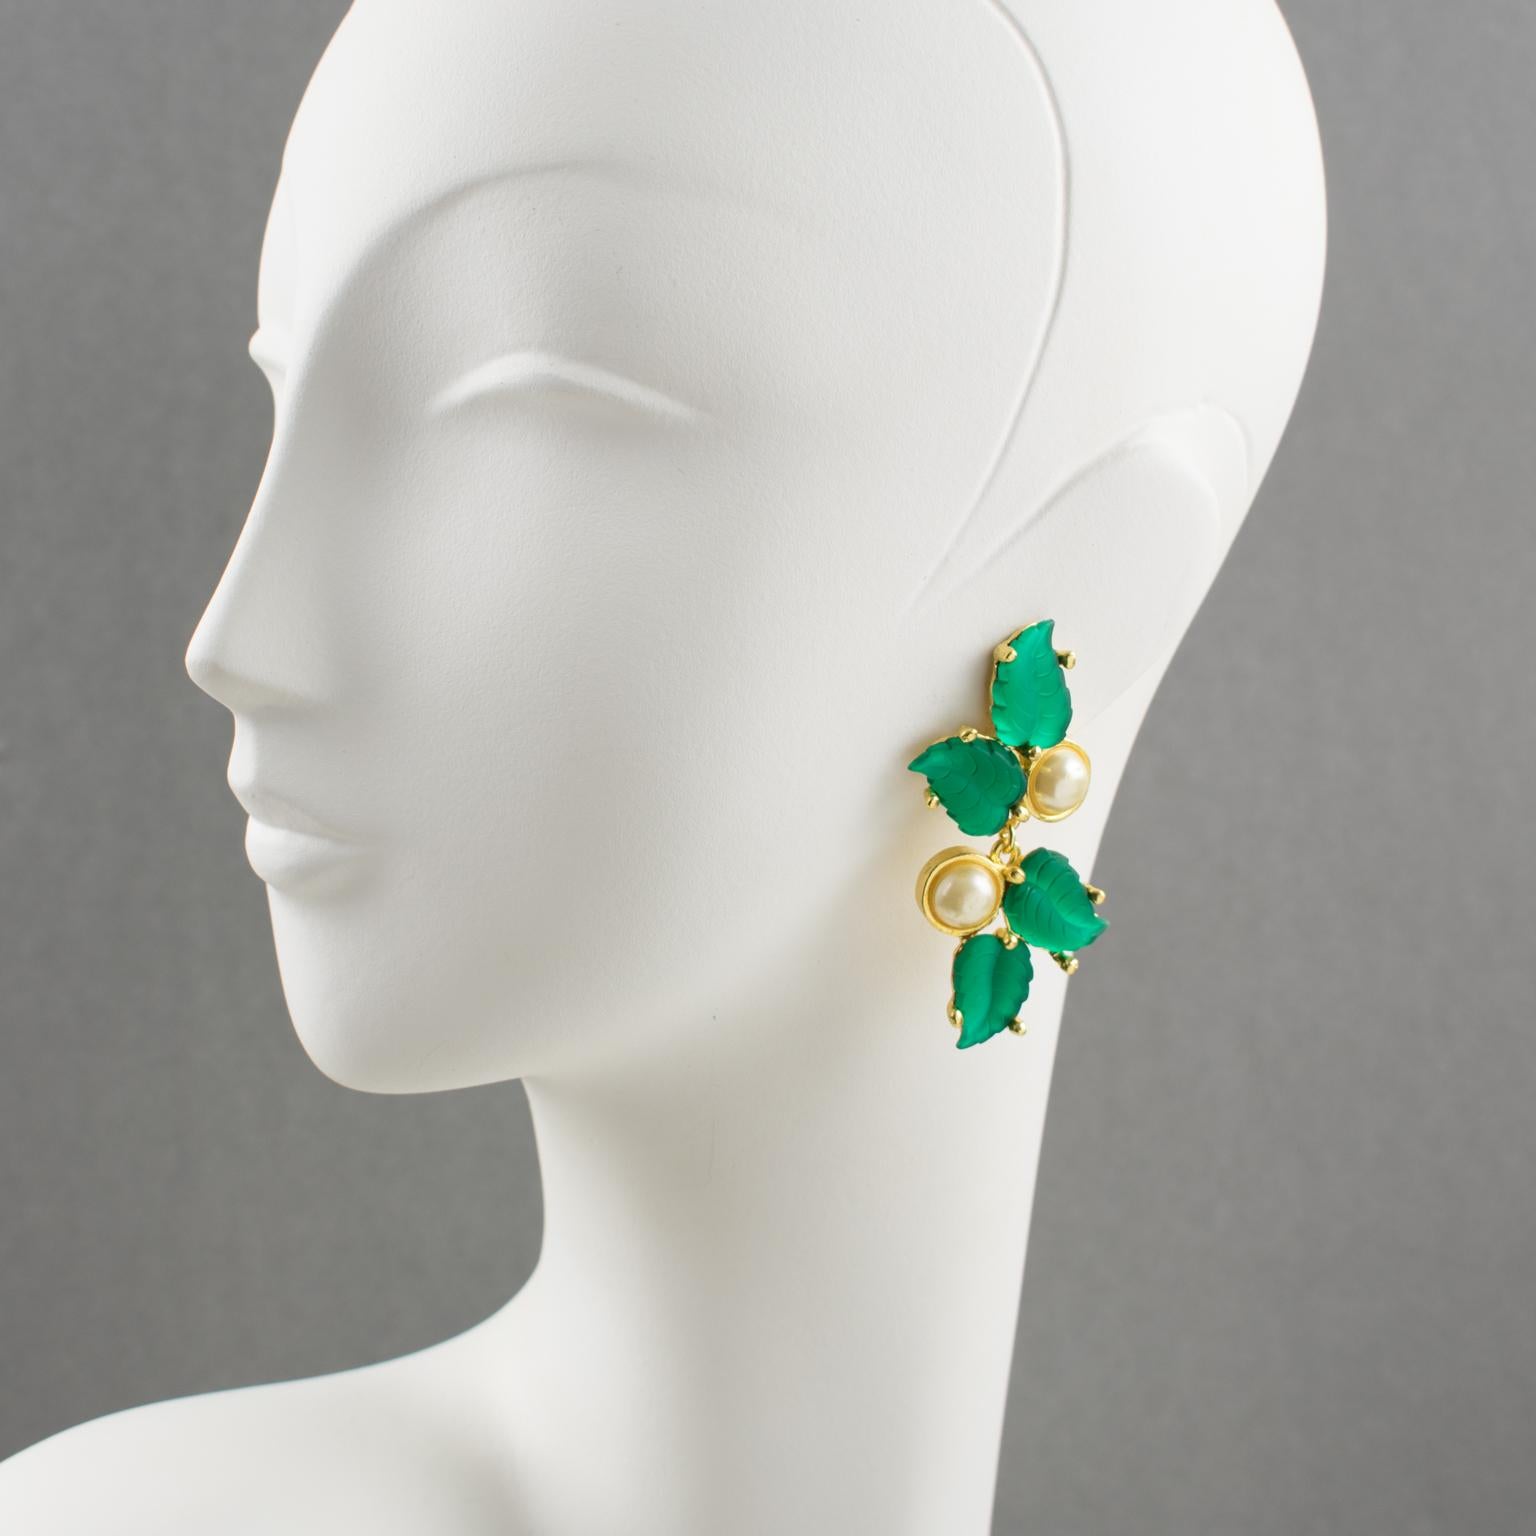 Very chic Madame Gres Paris clip-on earrings. Romantic floral design with dangling shape featuring emerald green poured glass paste leaves compliment with pearl-like half beads. The earrings are signed underside on each element: 